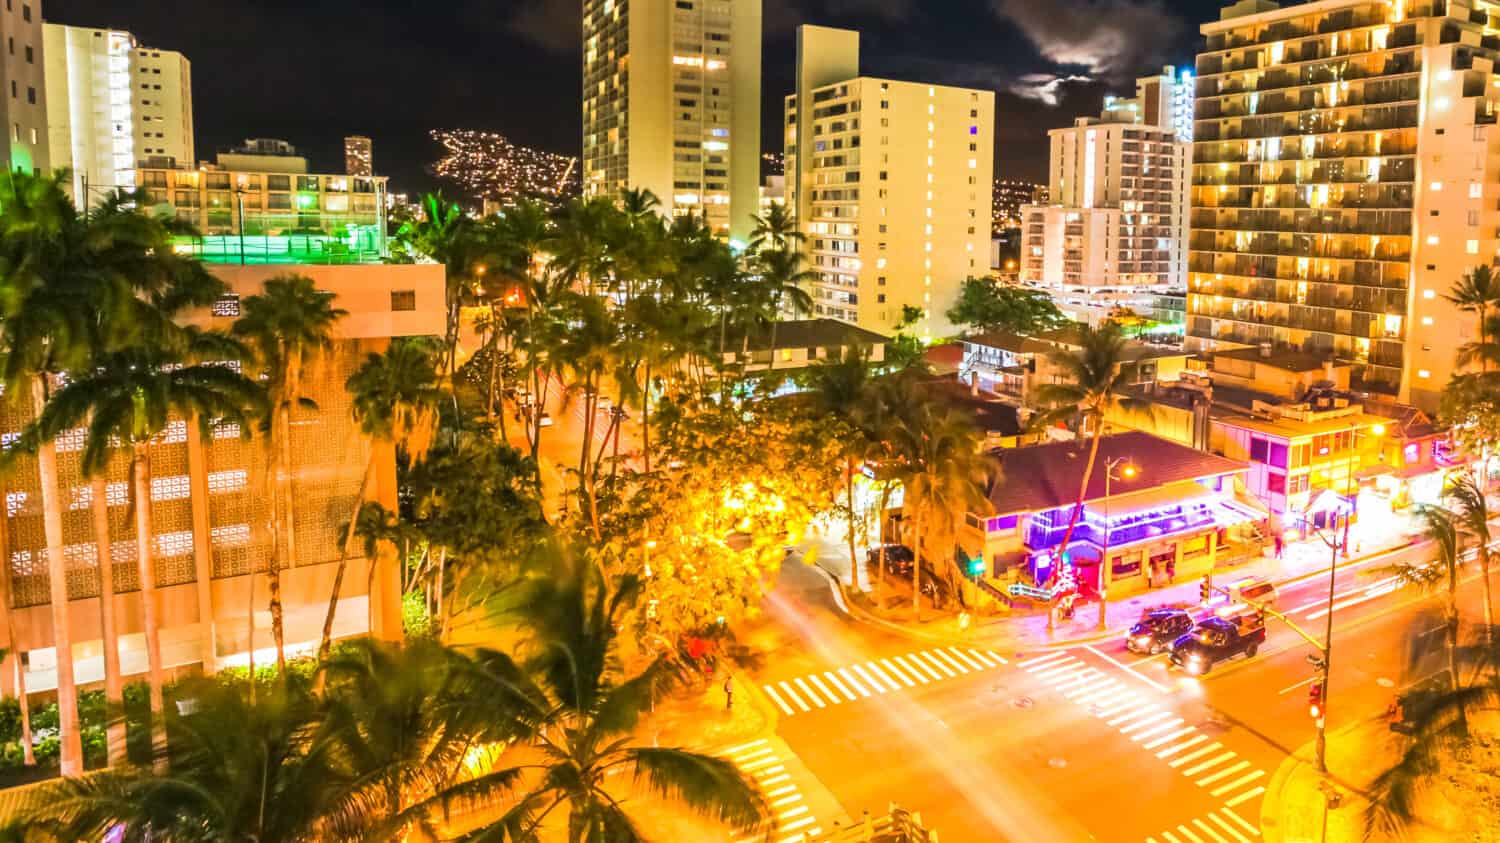 Aerial view night traffic of Waikiki city in Oahu, Hawaii, United States. Moving people and car glowing trails in the street. City night lights of shops and nightlife concept